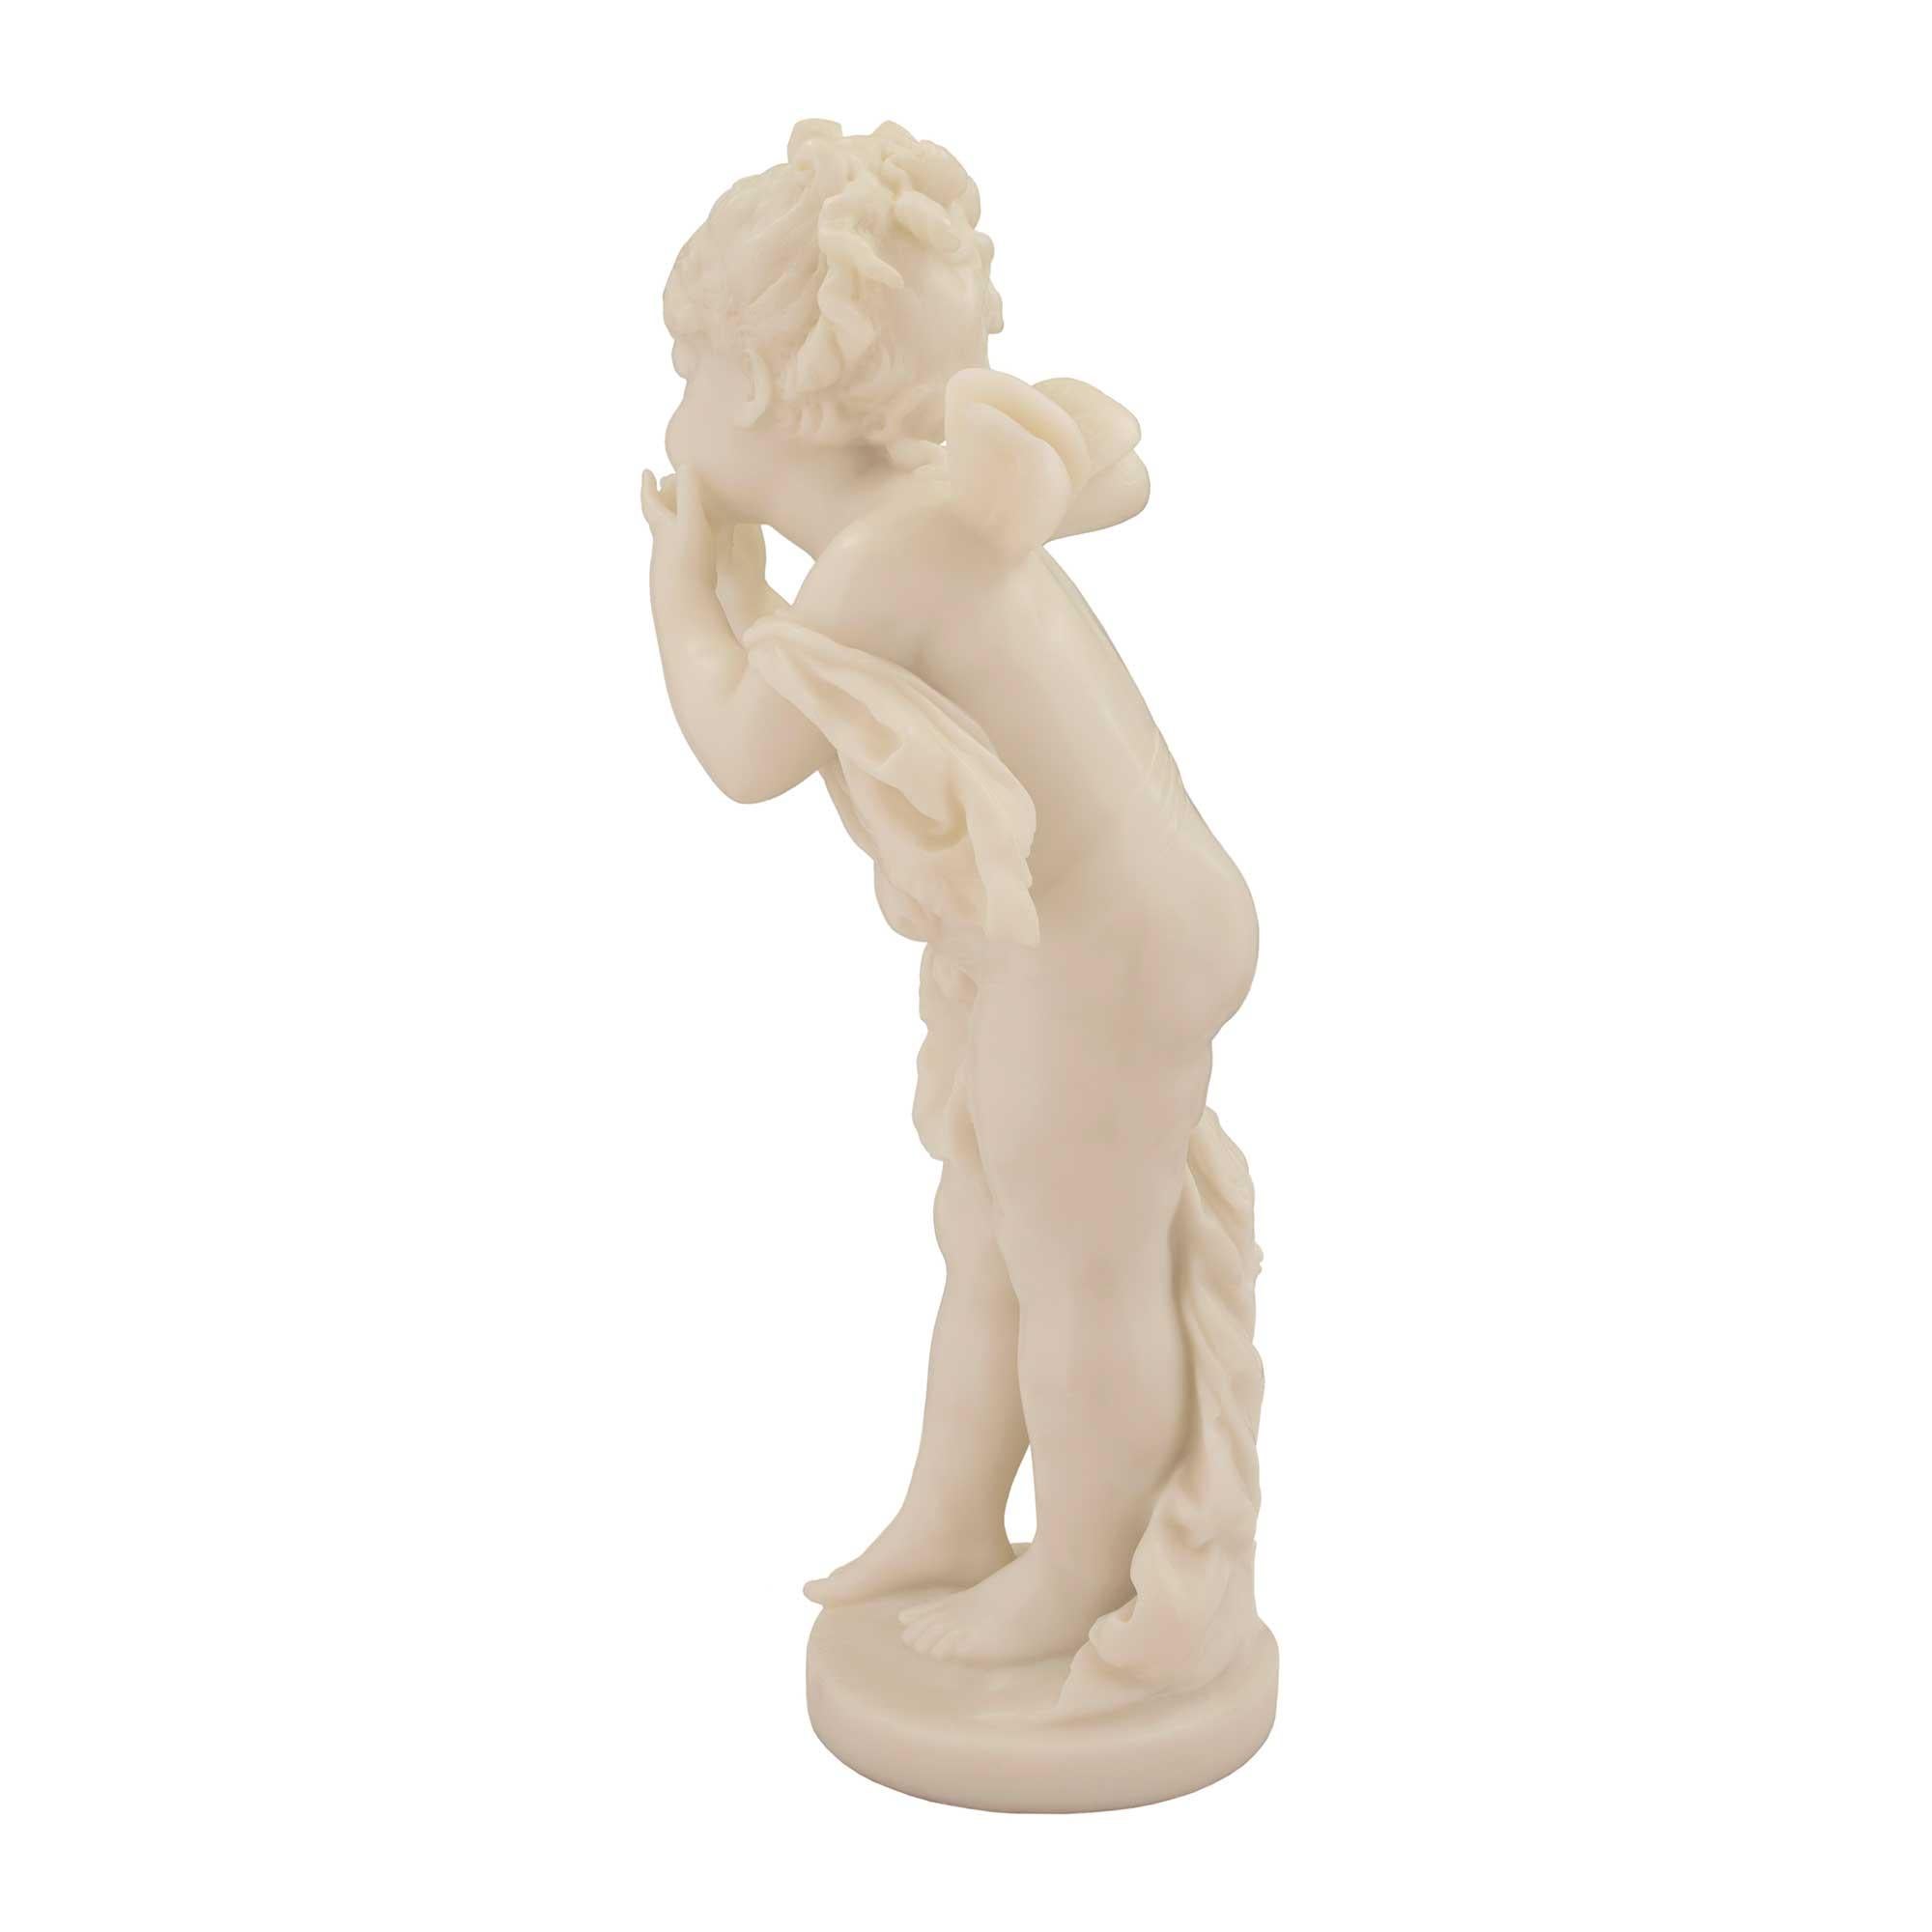 Italian Mid-19th Century White Carrara Marble Statue of Winged Girl For Sale 2